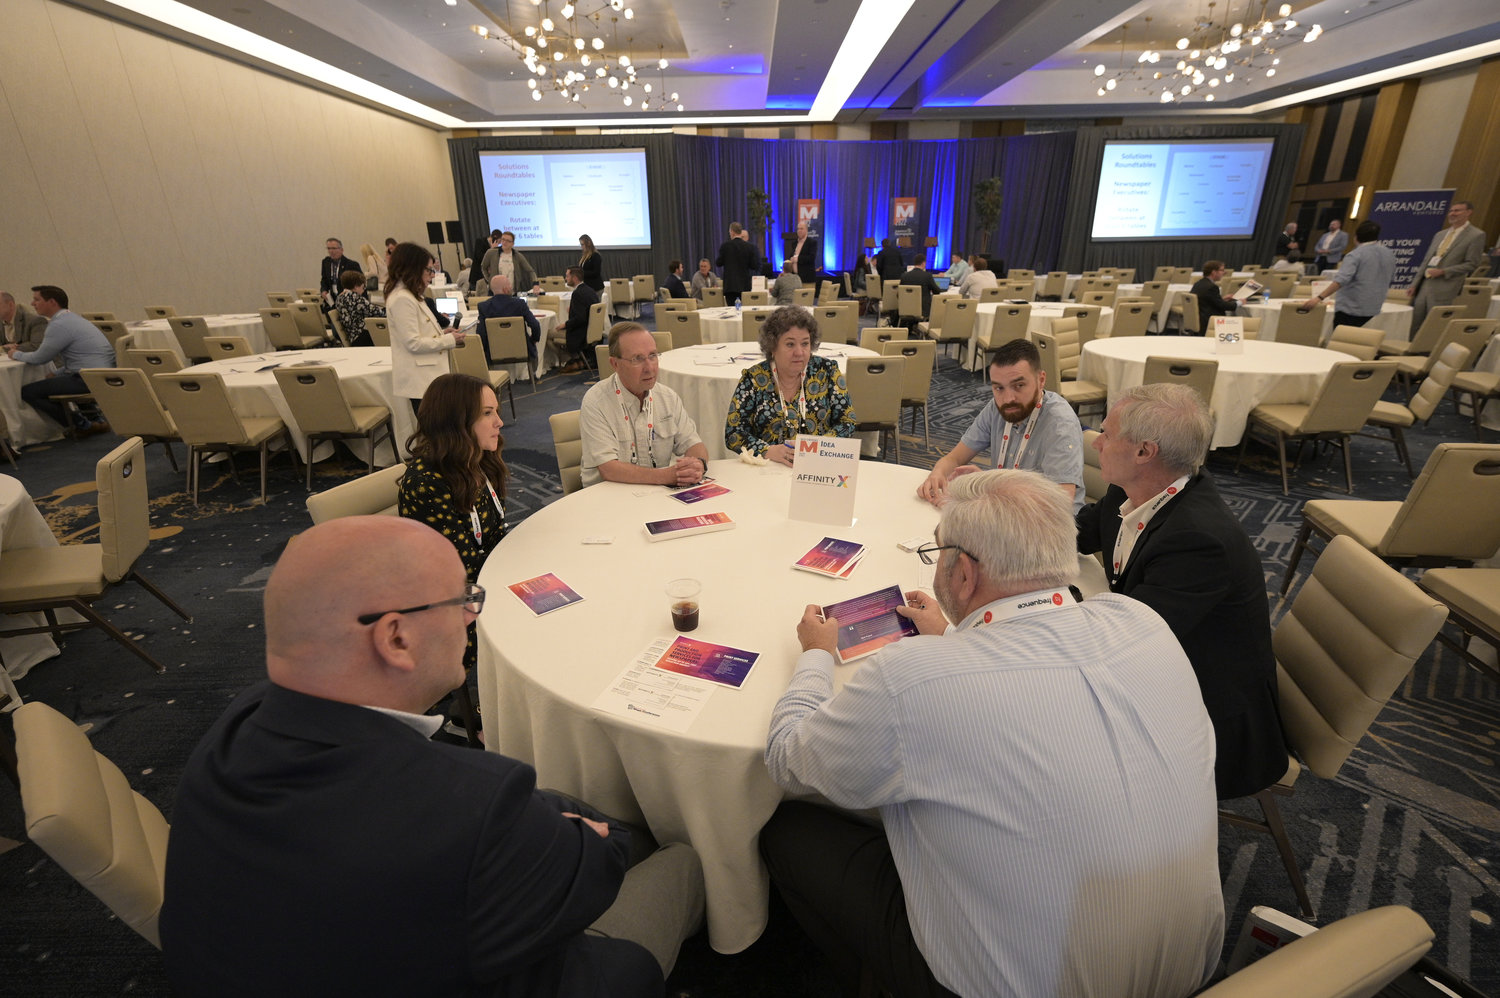 AffinityX is a marketing services company and helping publishers evolve with the market was among the Roundtable topics discussed. (Photo by Phelan M. Ebenhack)